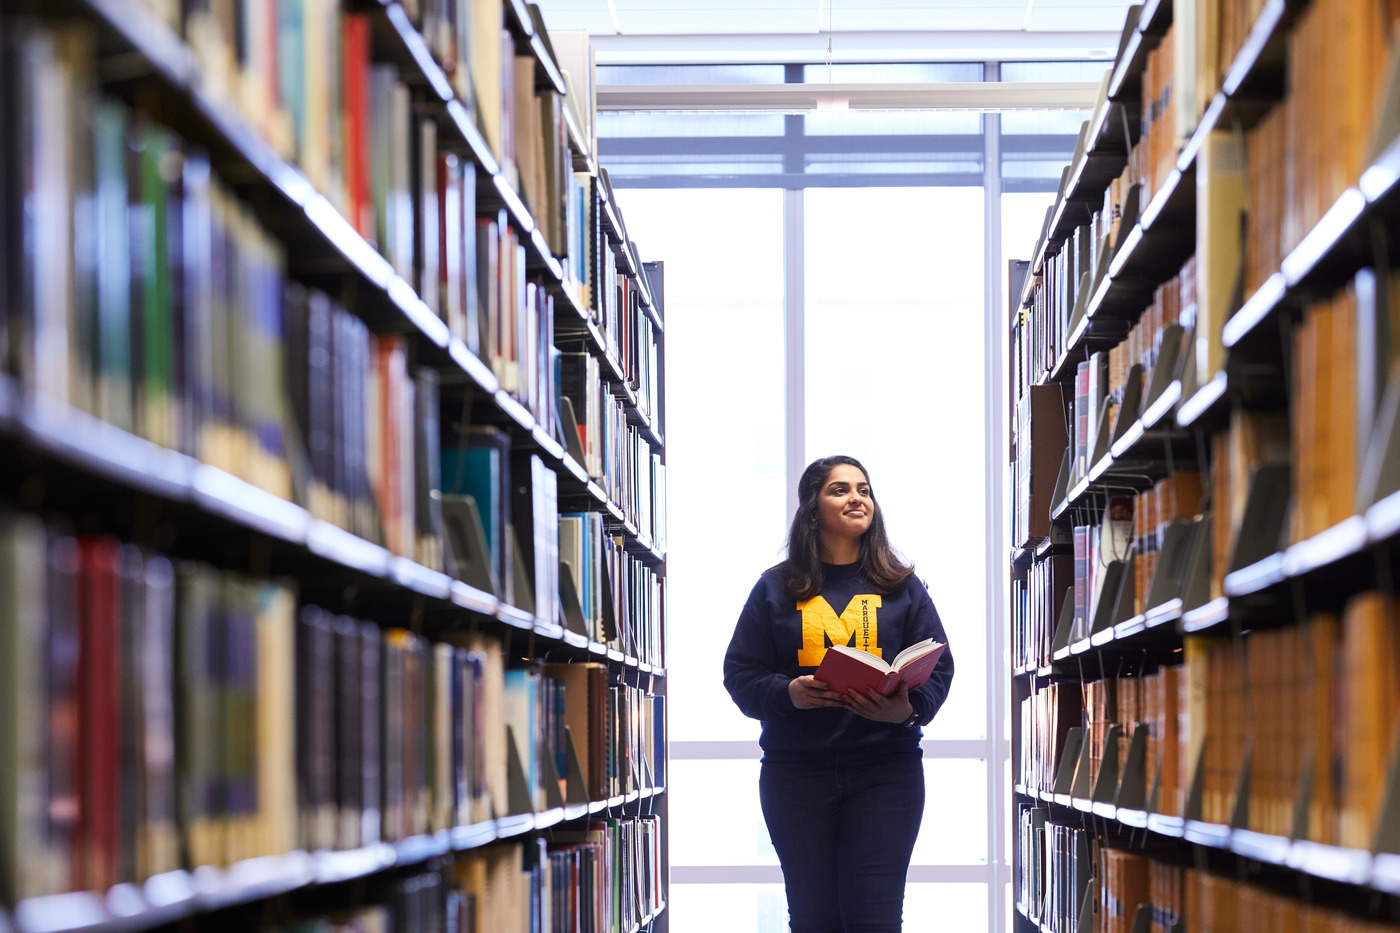 students walks in library isle observes books